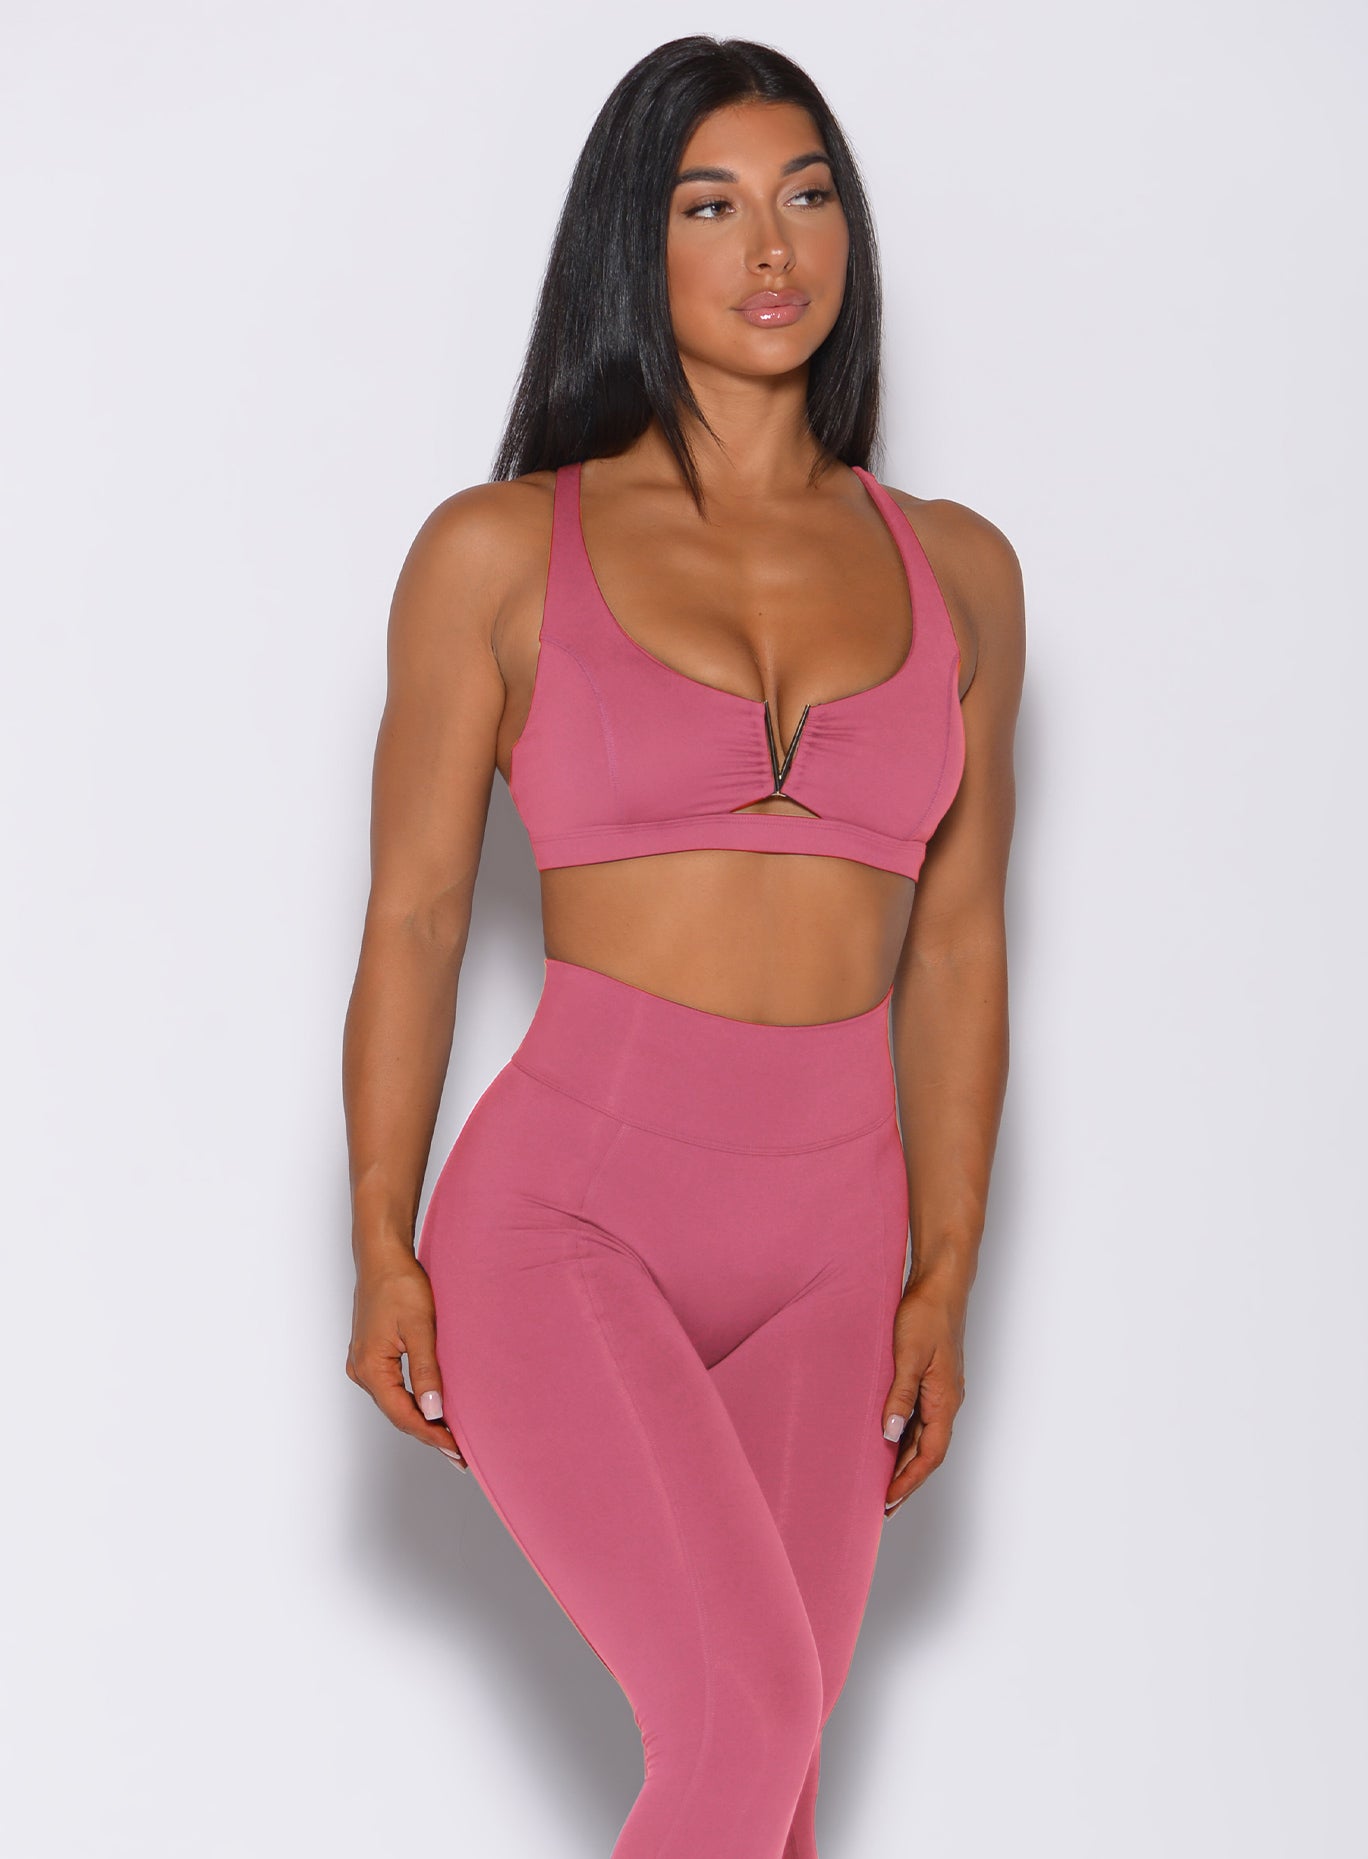 Front profile view of a model wearing our knockout sports bra in blush color and a matching leggings